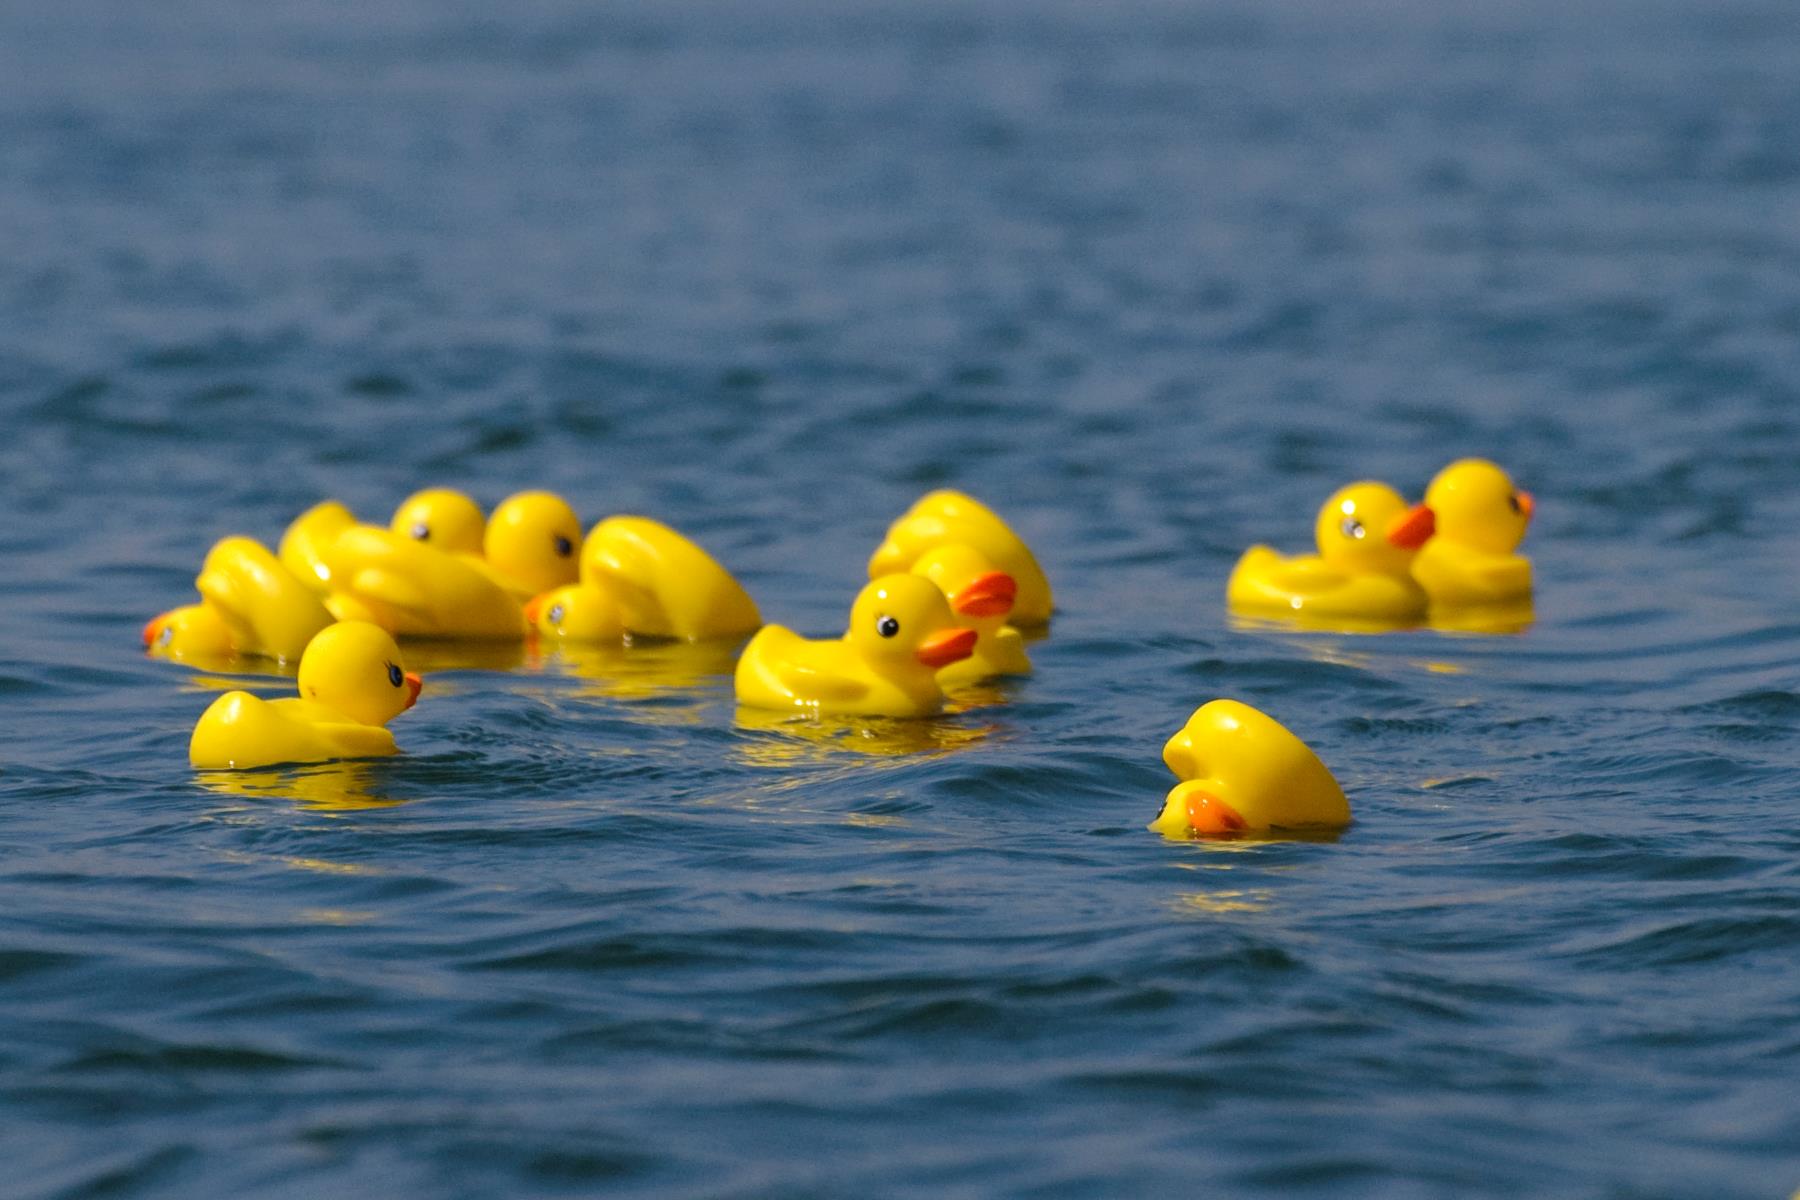 Several rubber ducks floating on water